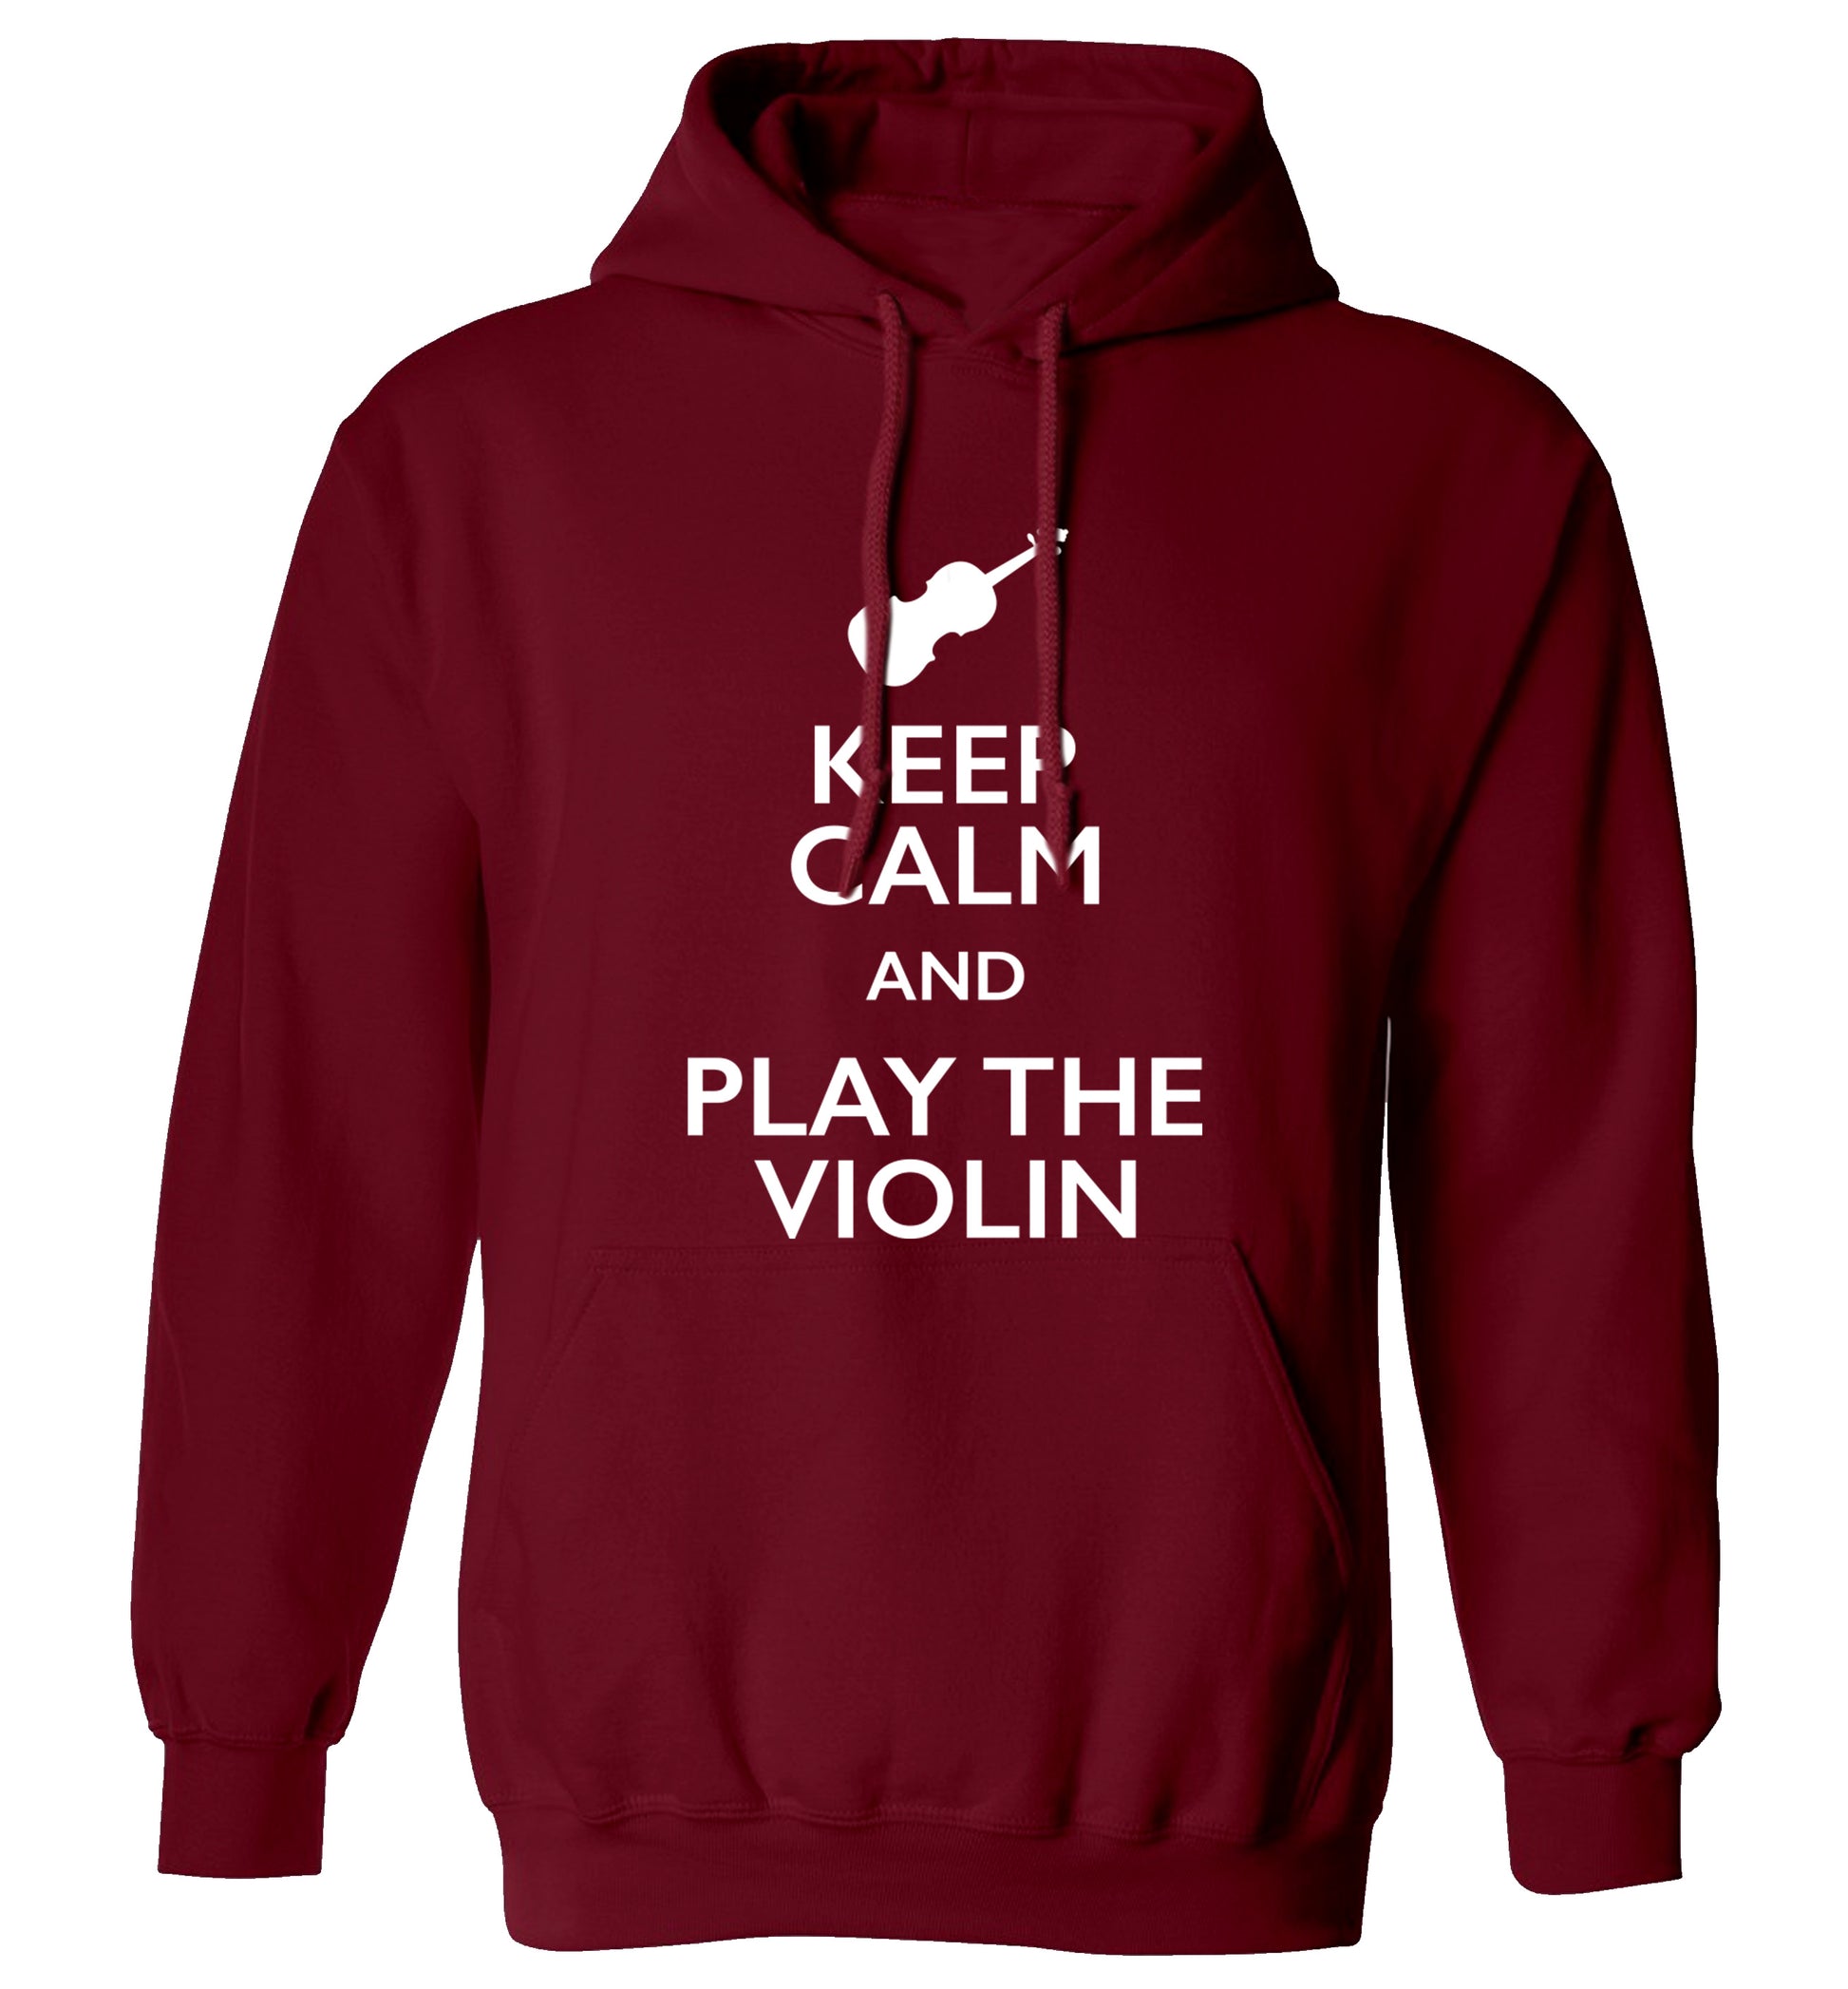 Keep calm and play the violin adults unisex maroon hoodie 2XL